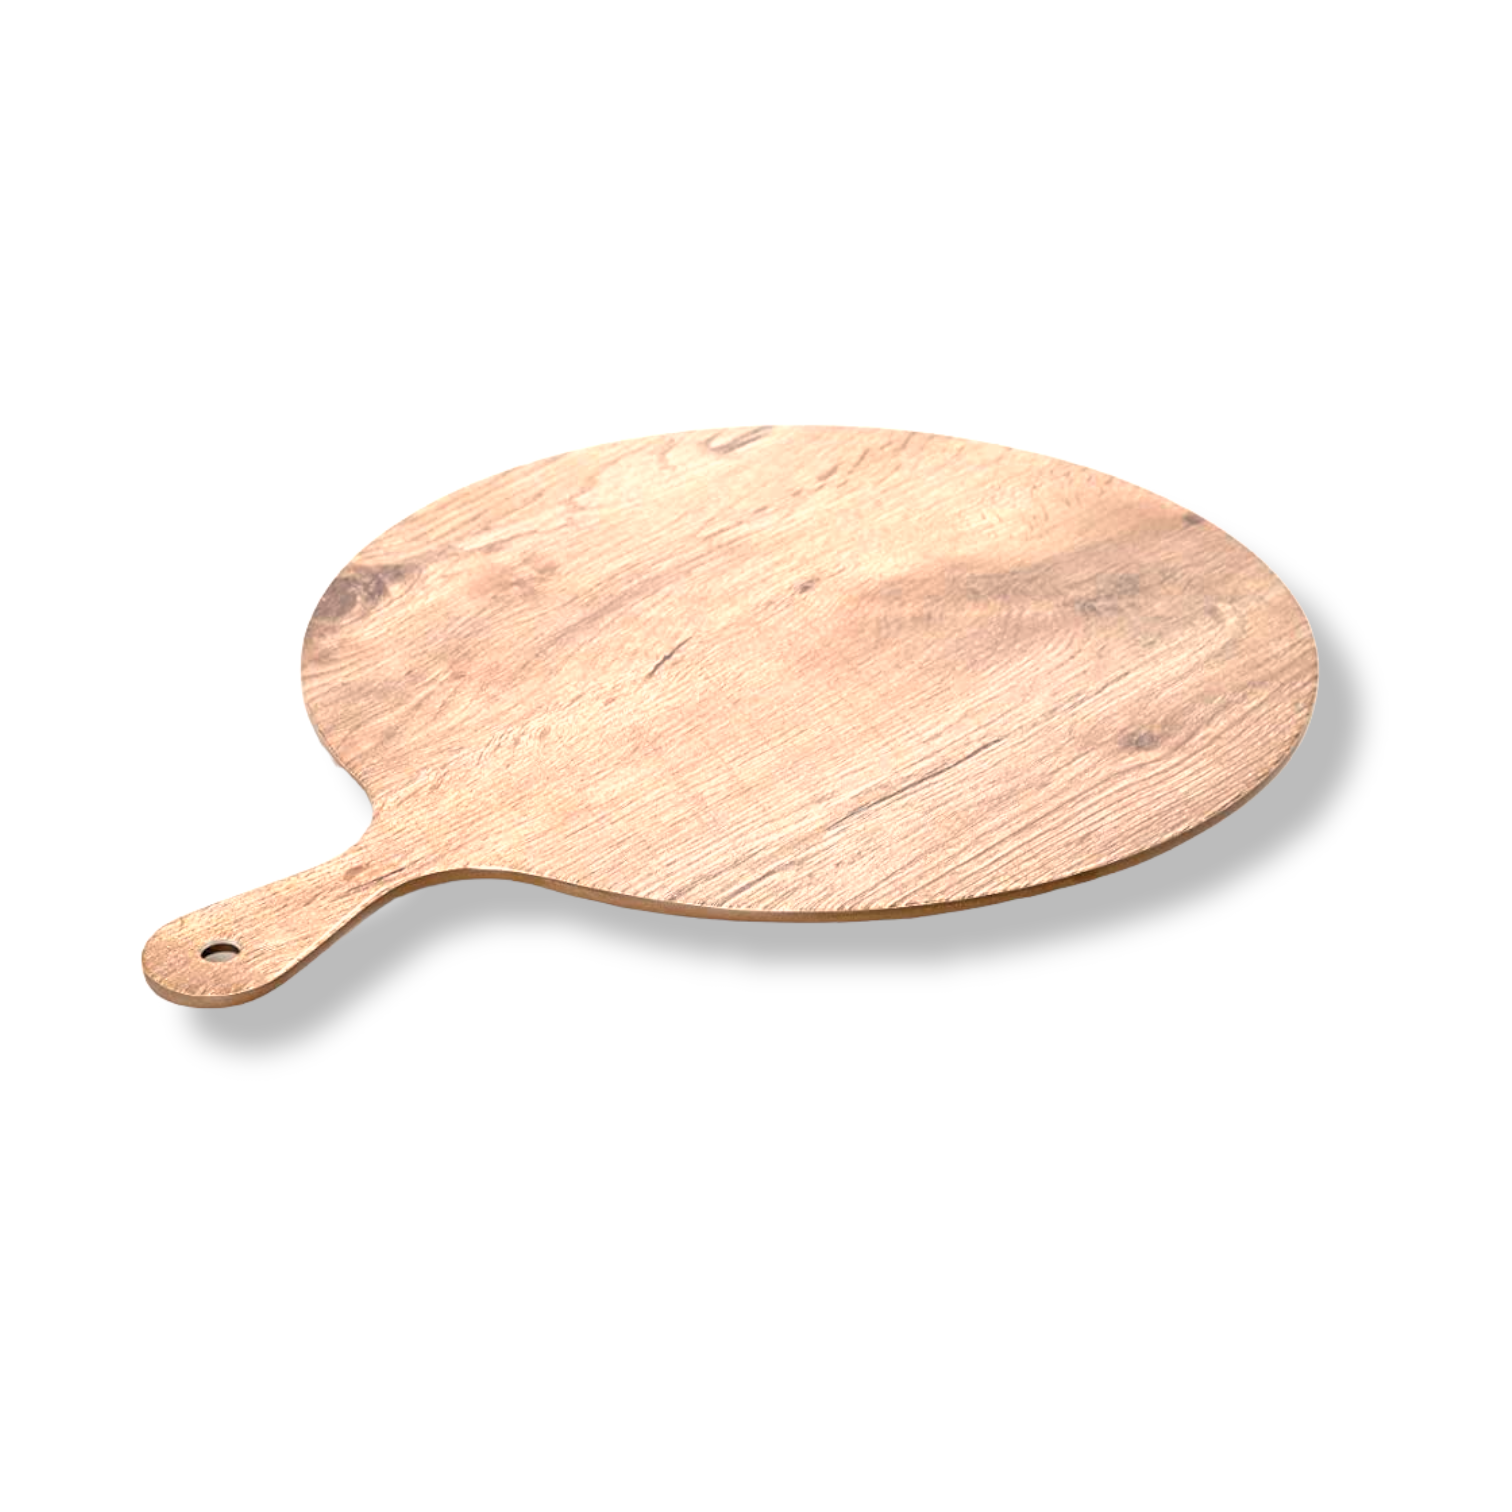 36 Cm Melamine round plate with a handle and a wooden-look finish - Lunaz Shop